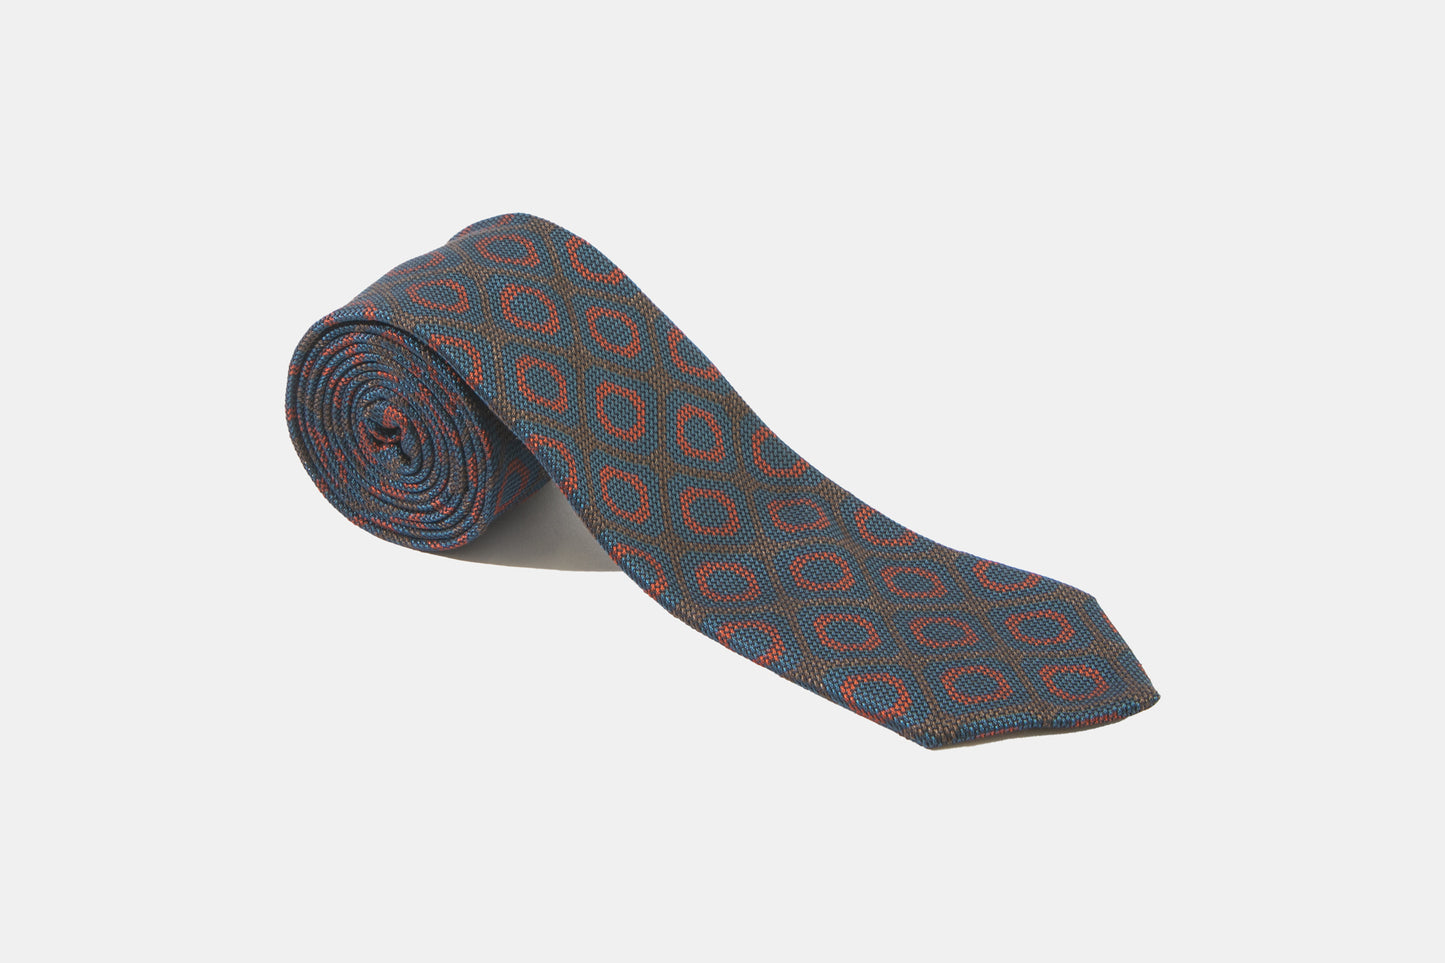 khakis of Carmel - brown silk tie with red and blue geometric pattern